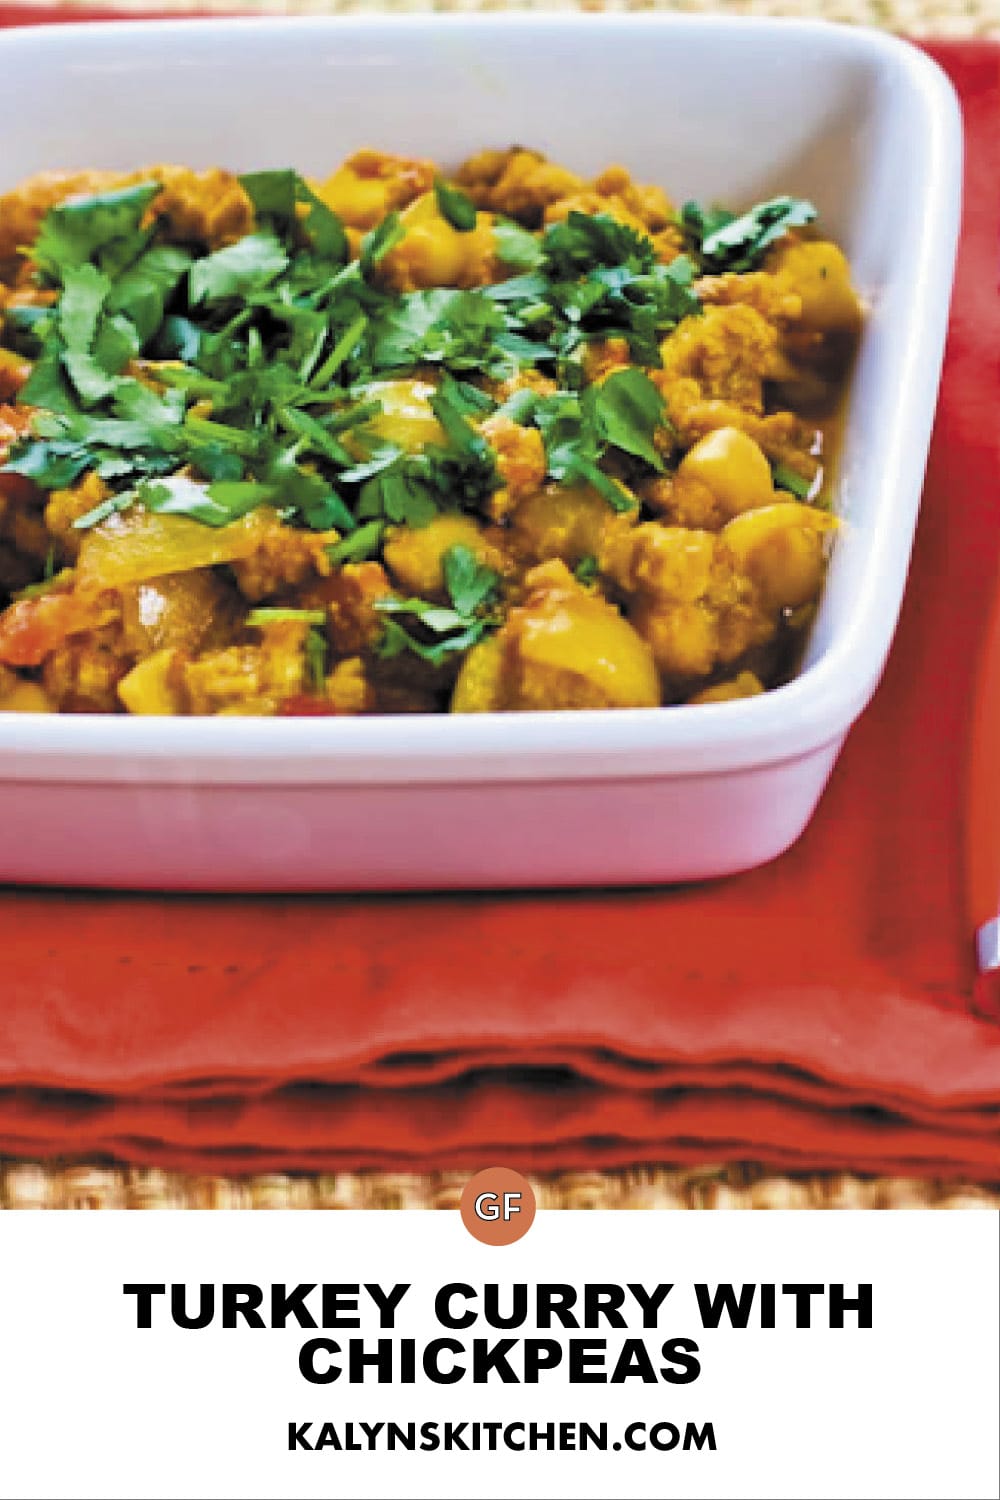 Pinterest image of Turkey Curry with Chickpeas